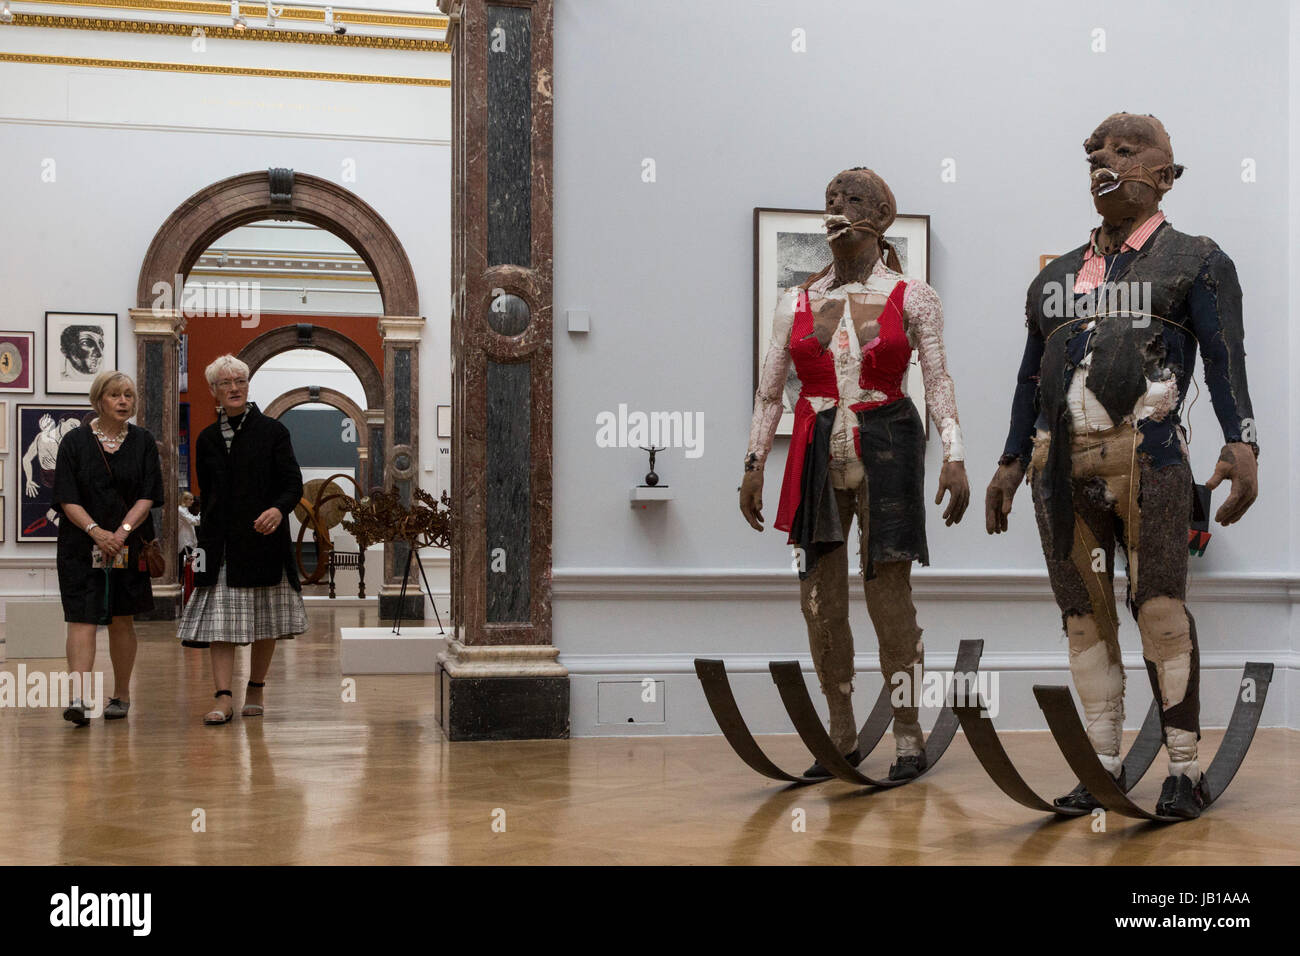 London, UK. 8 June 2017. Sculpture Defending Integrity from the Powers that Be by Tim Shaw RA. Press preview of the 249th Summer Exhibition of the Royal Academy of Arts, RA, co-ordinated by Eileen Cooper RA. The exhibition opens to the public on 13 June and runs until 20 August 2017. EDITORIAL USE ONLY. Stock Photo